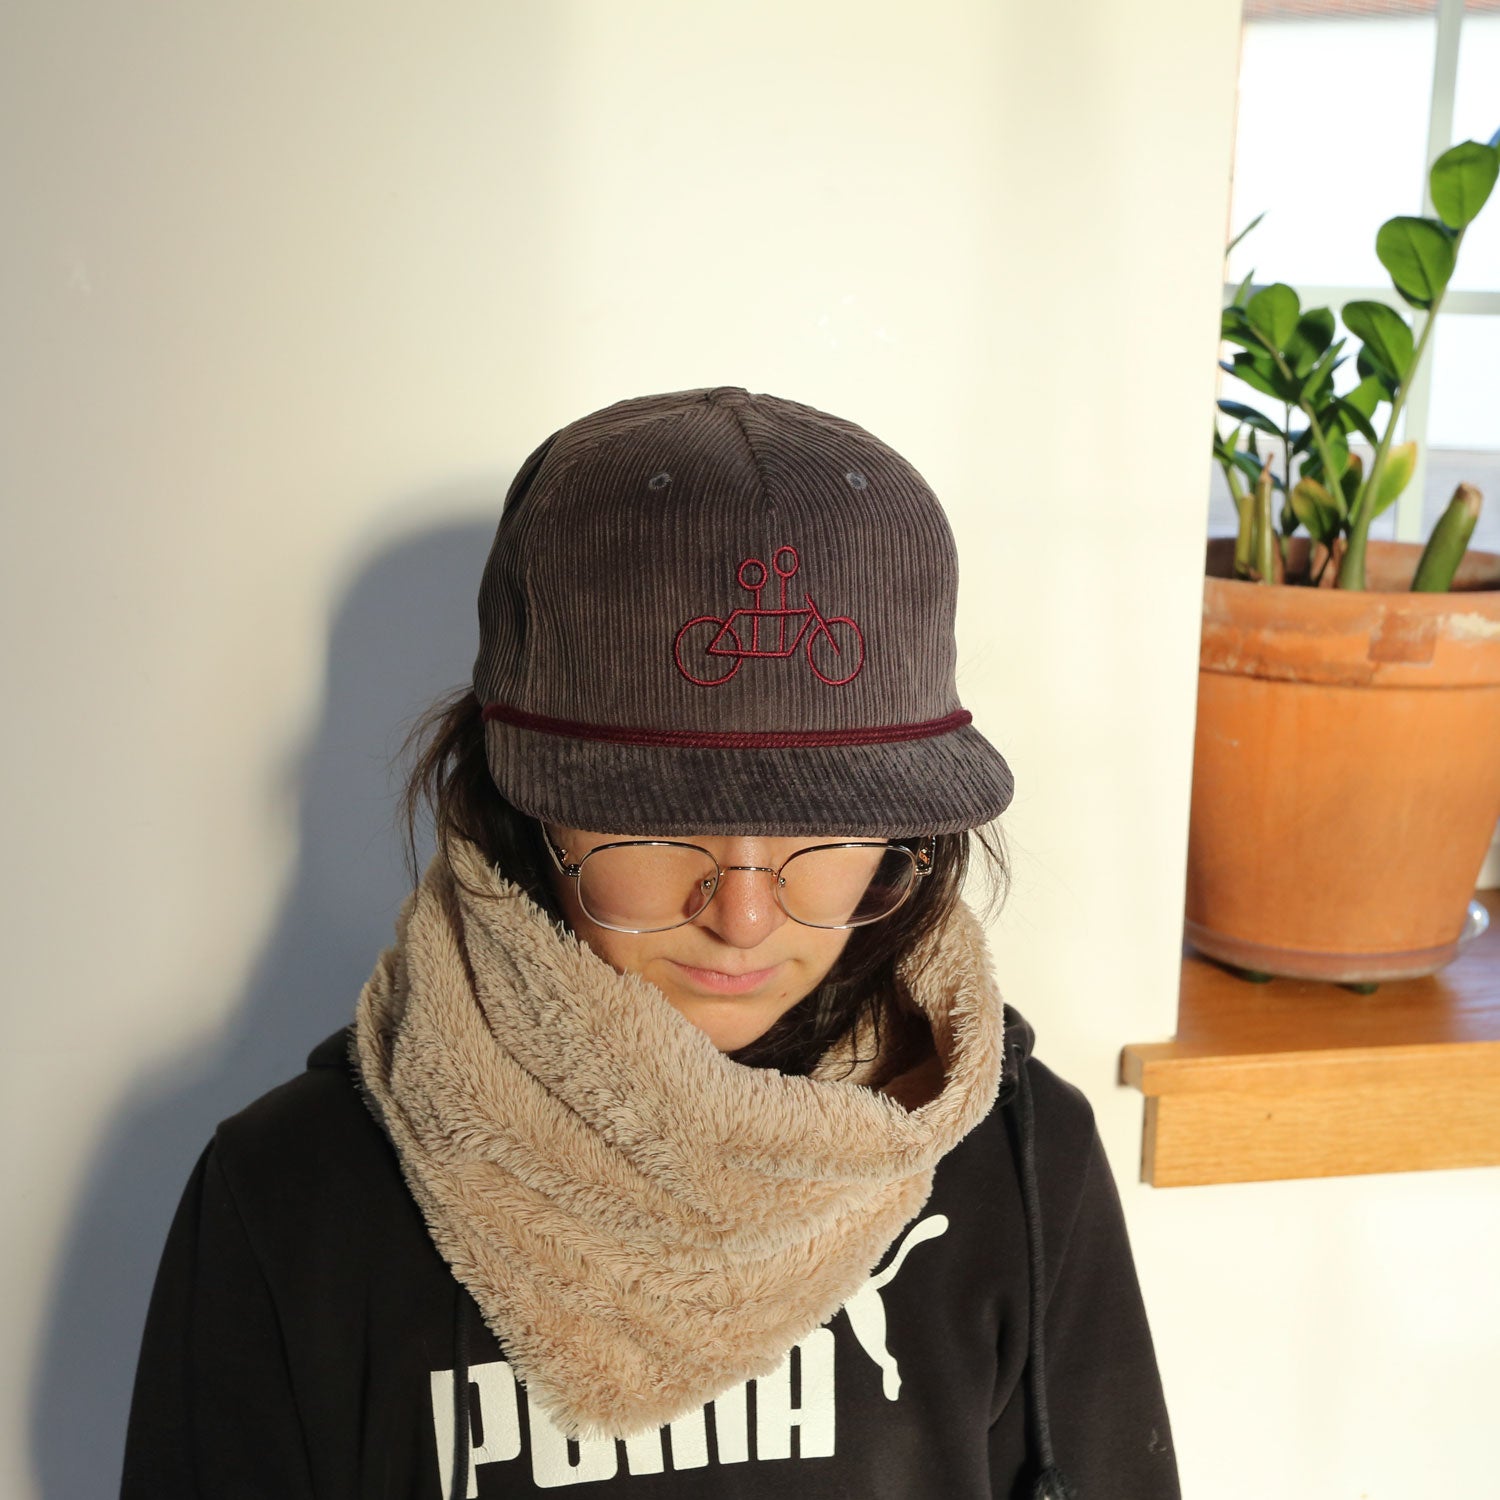 A person wearing a Tandem Coffee Roasters custom Corduroy Tandem Hat with a red bicycle logo, round glasses, and a large fluffy scarf, standing next to a potted plant in a sunlit room.